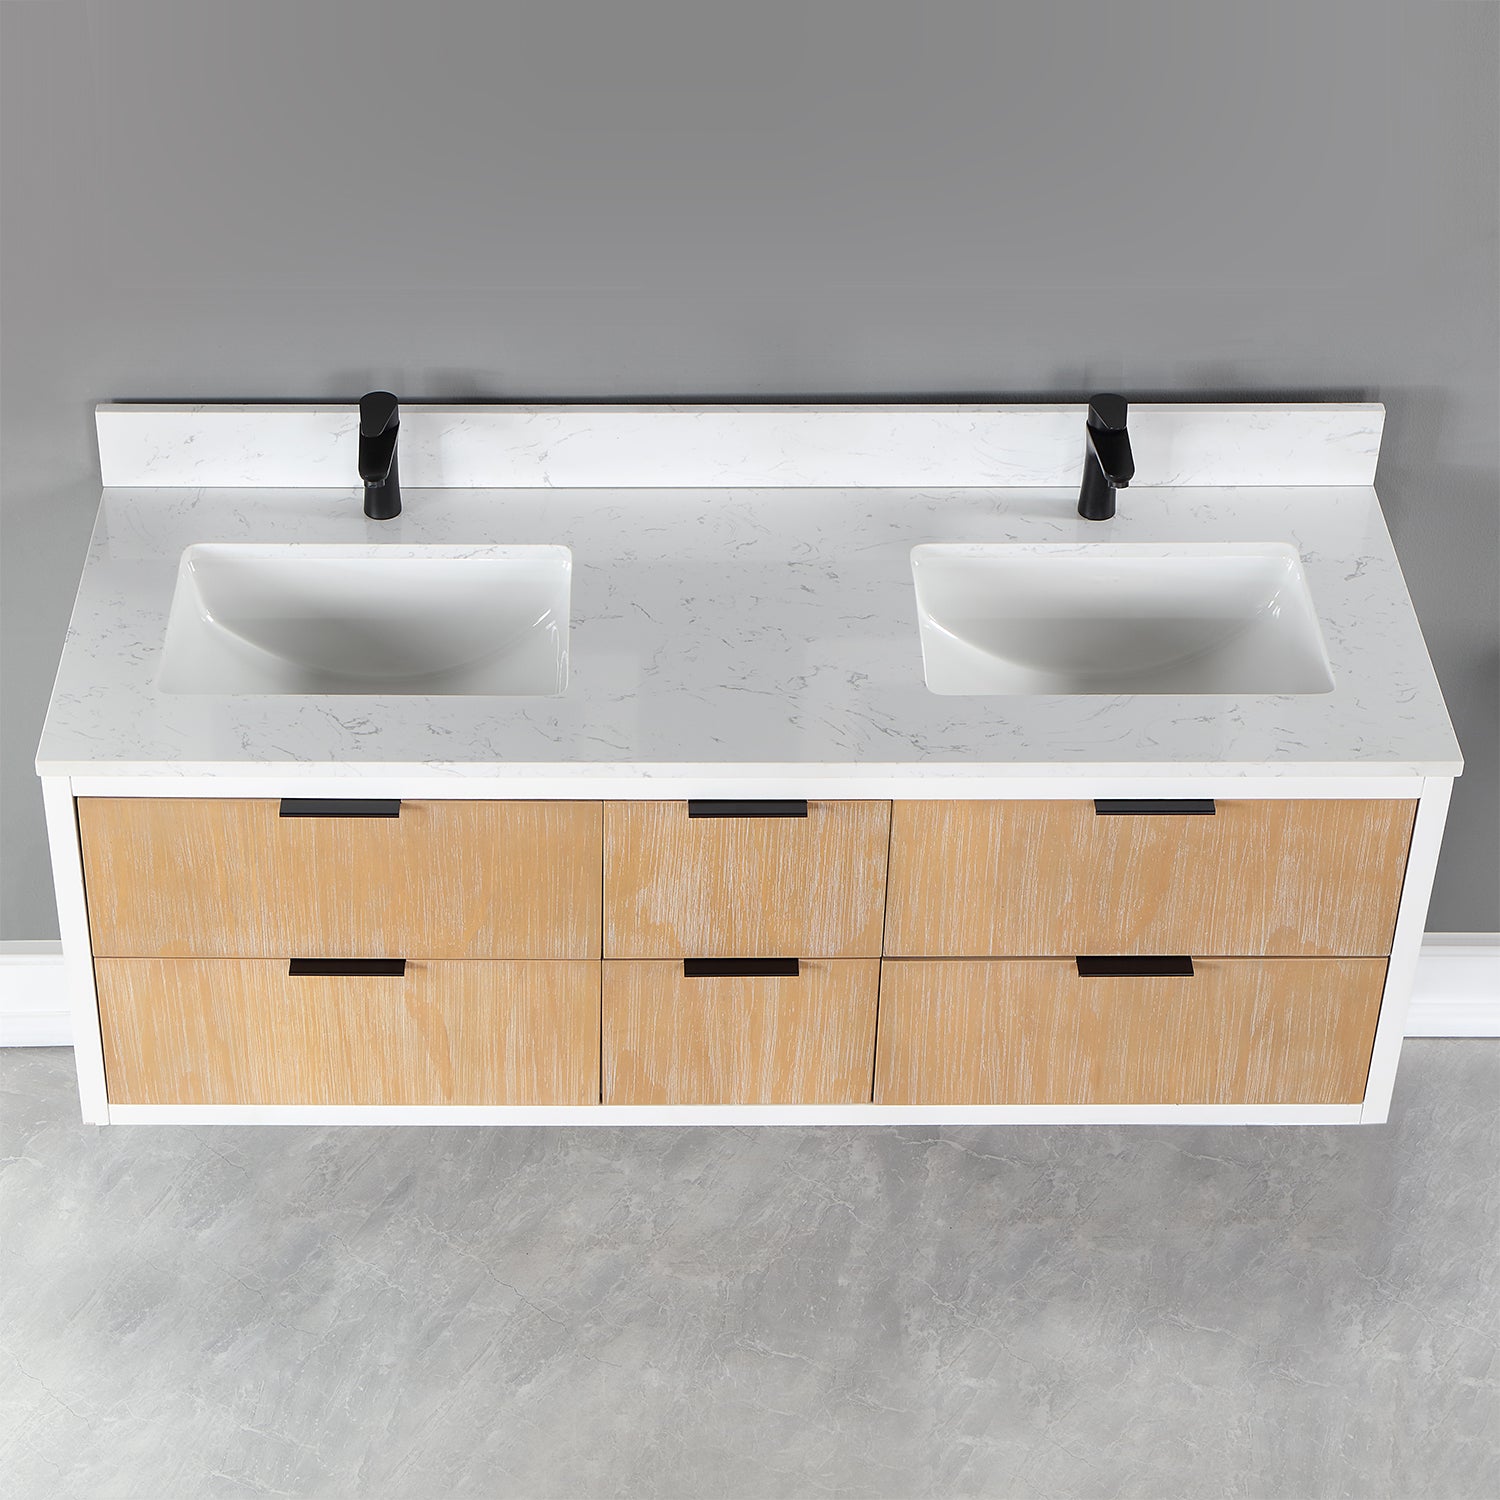 Dione 60" Double Bathroom Vanity Set with Aosta White Stone Countertop